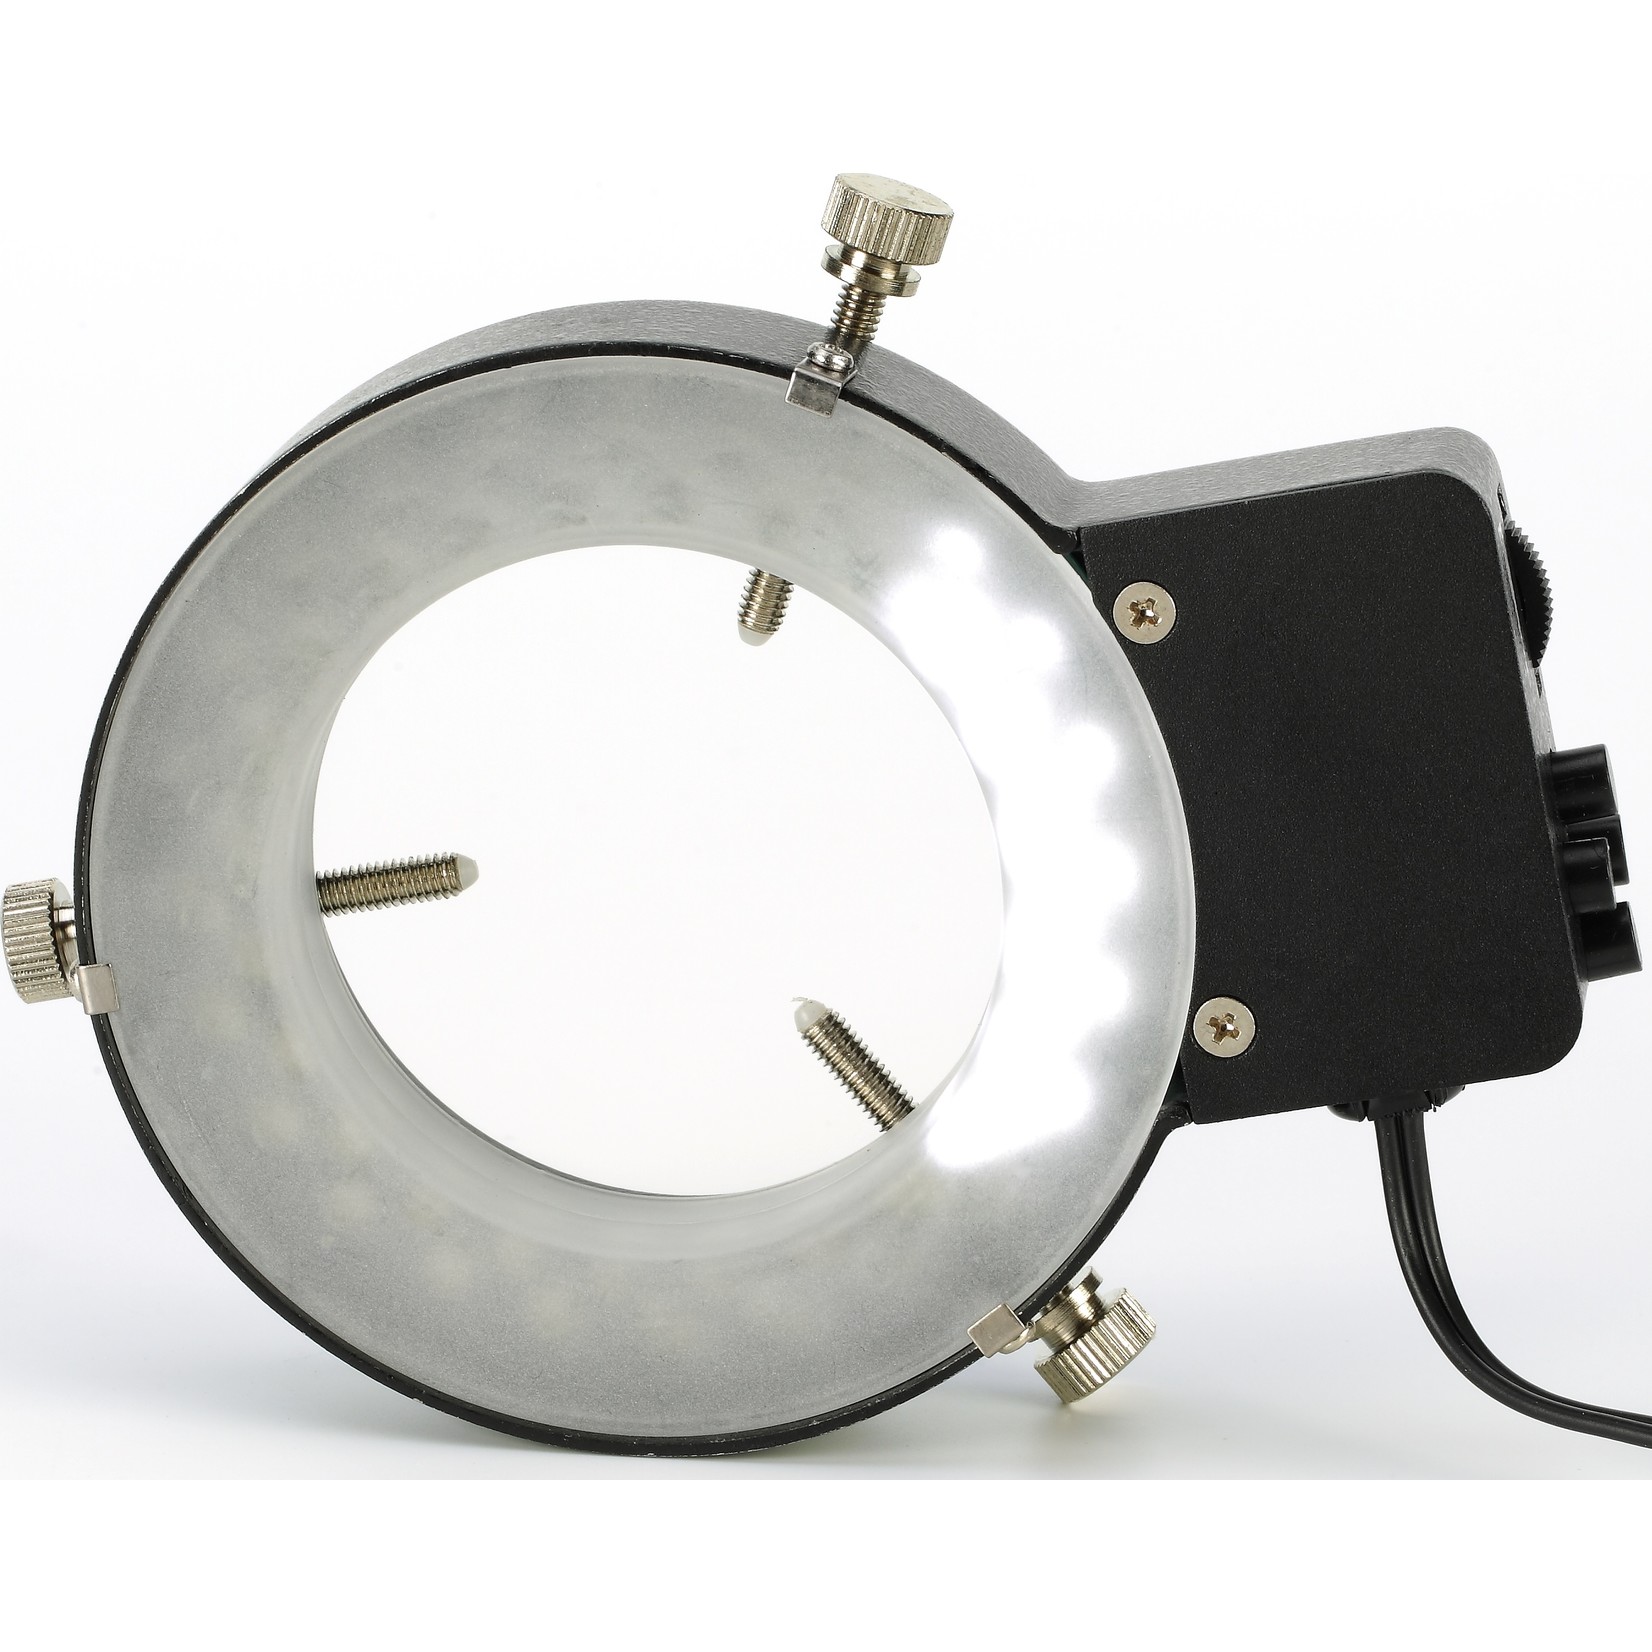 LED ring light with 144 LEDs, diffuser, dimming and segment switching